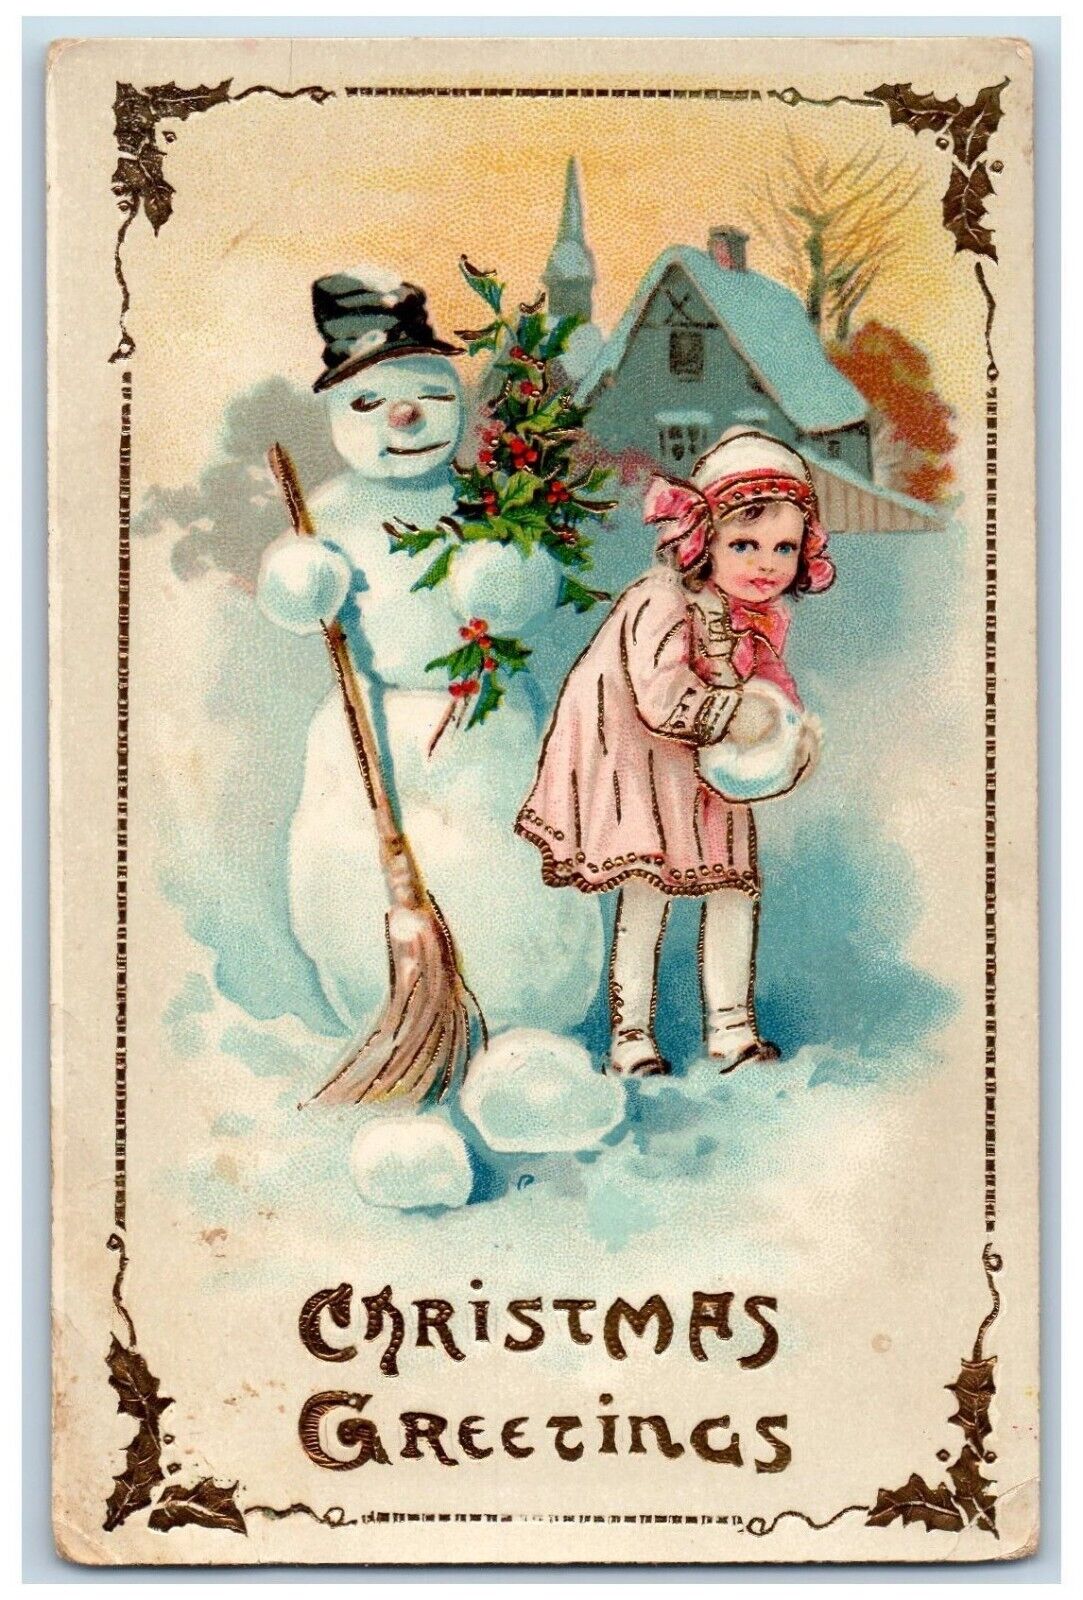 Christmas Postcard Greetings Girl Snowman With Holly Berries Gel Gold Gilt 1914